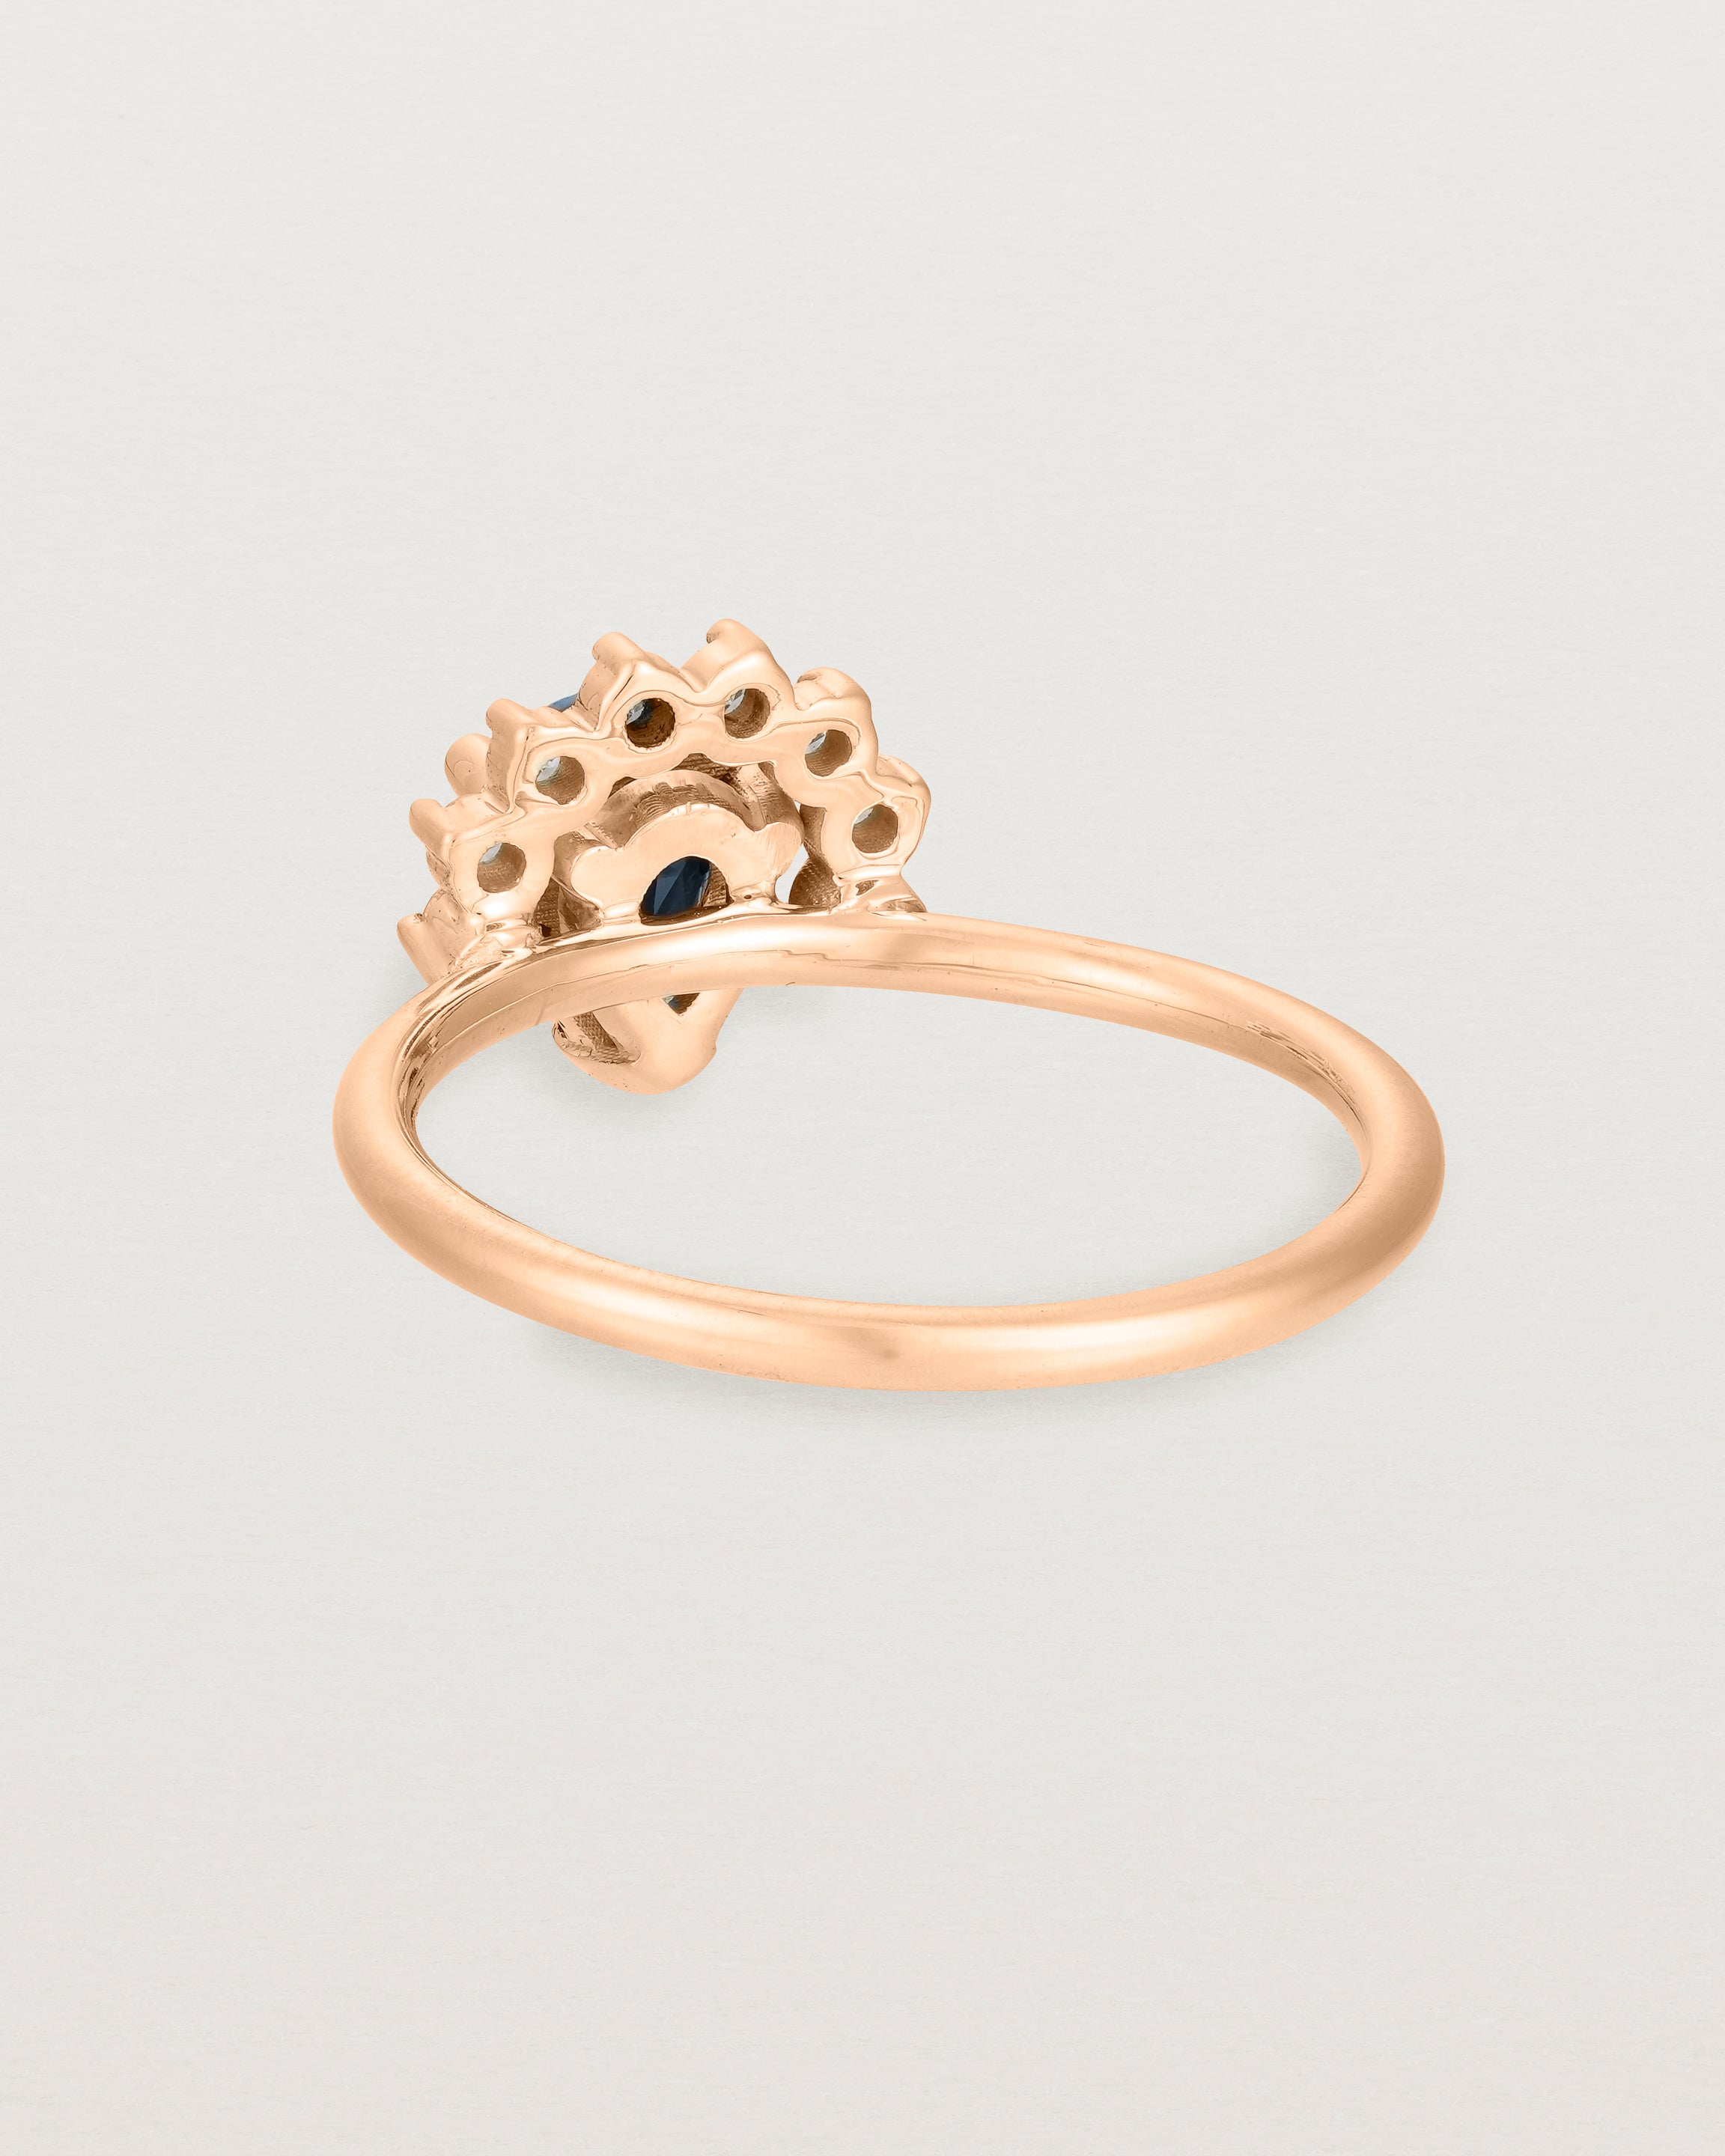 Back view of the Posie Ring | Rutilated Quartz & Diamonds | Rose Gold.